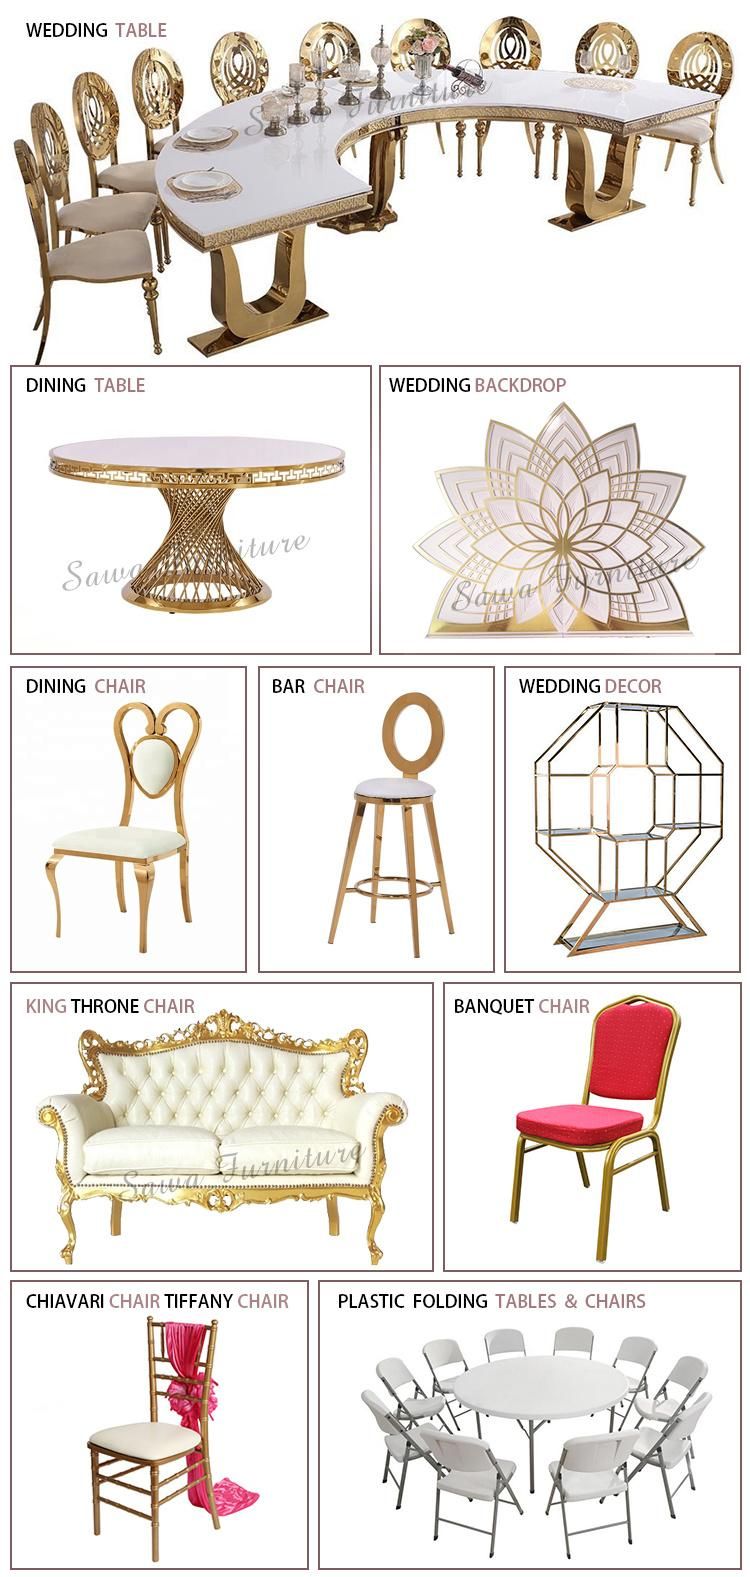 Hot Sale Dining Chair for Wedding Banquet